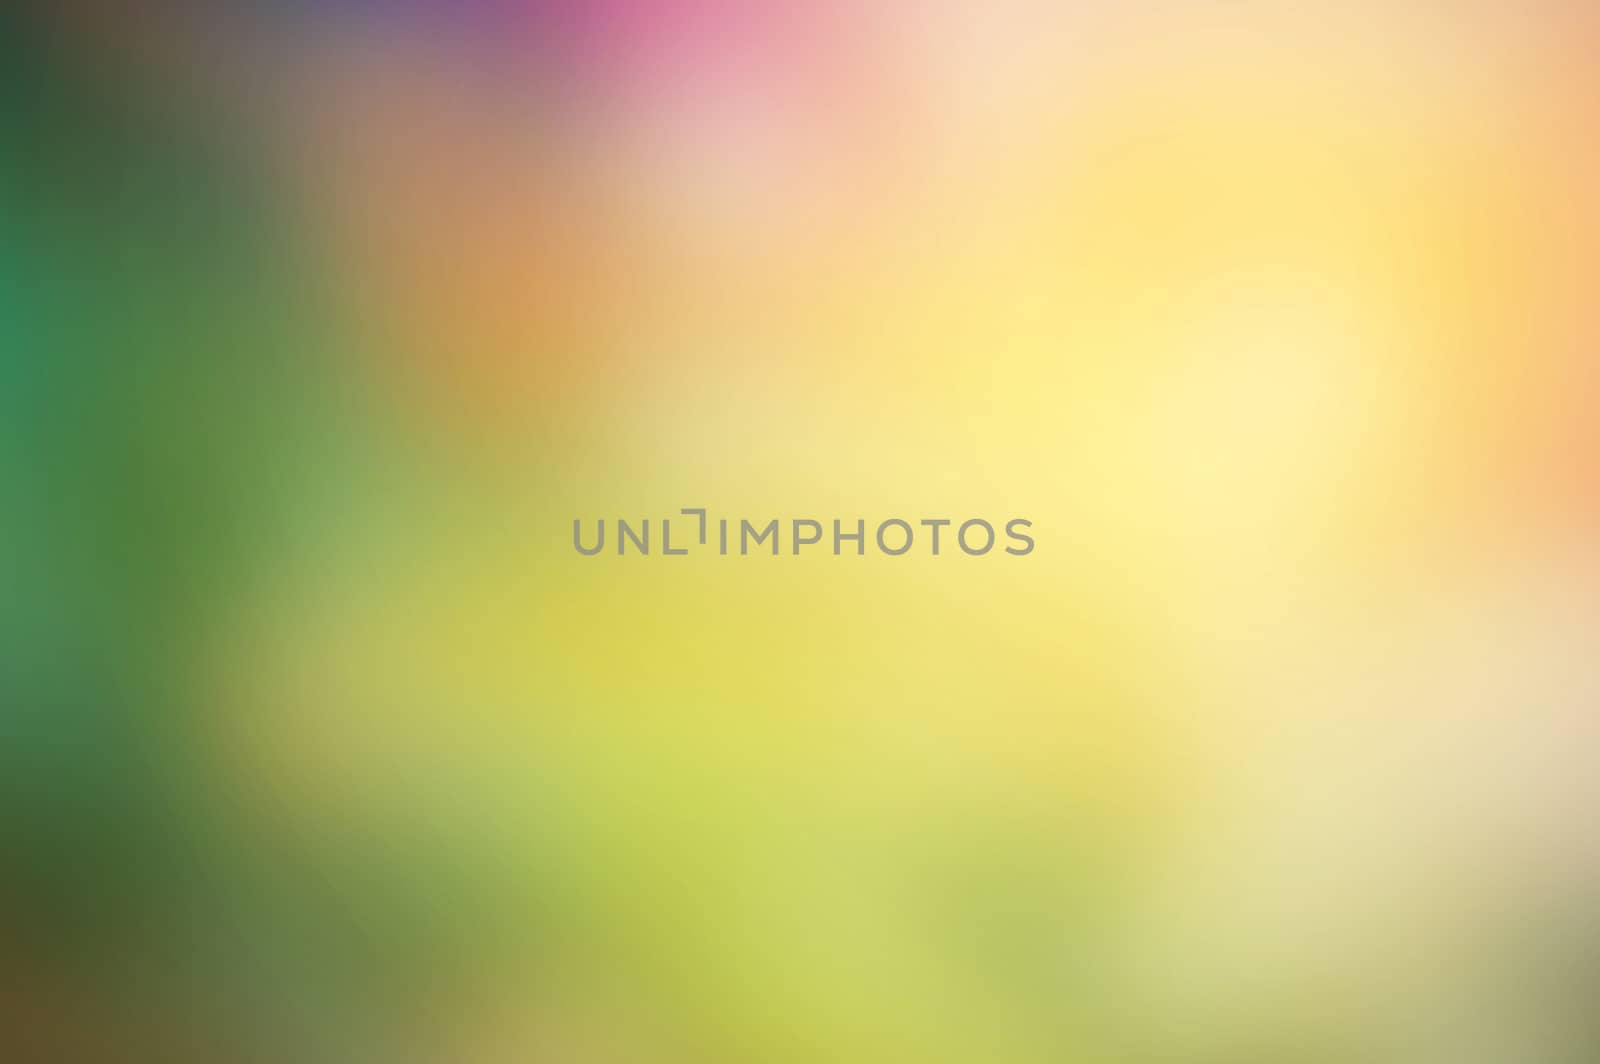 Colorful multi colored de-focused abstract photo blur background